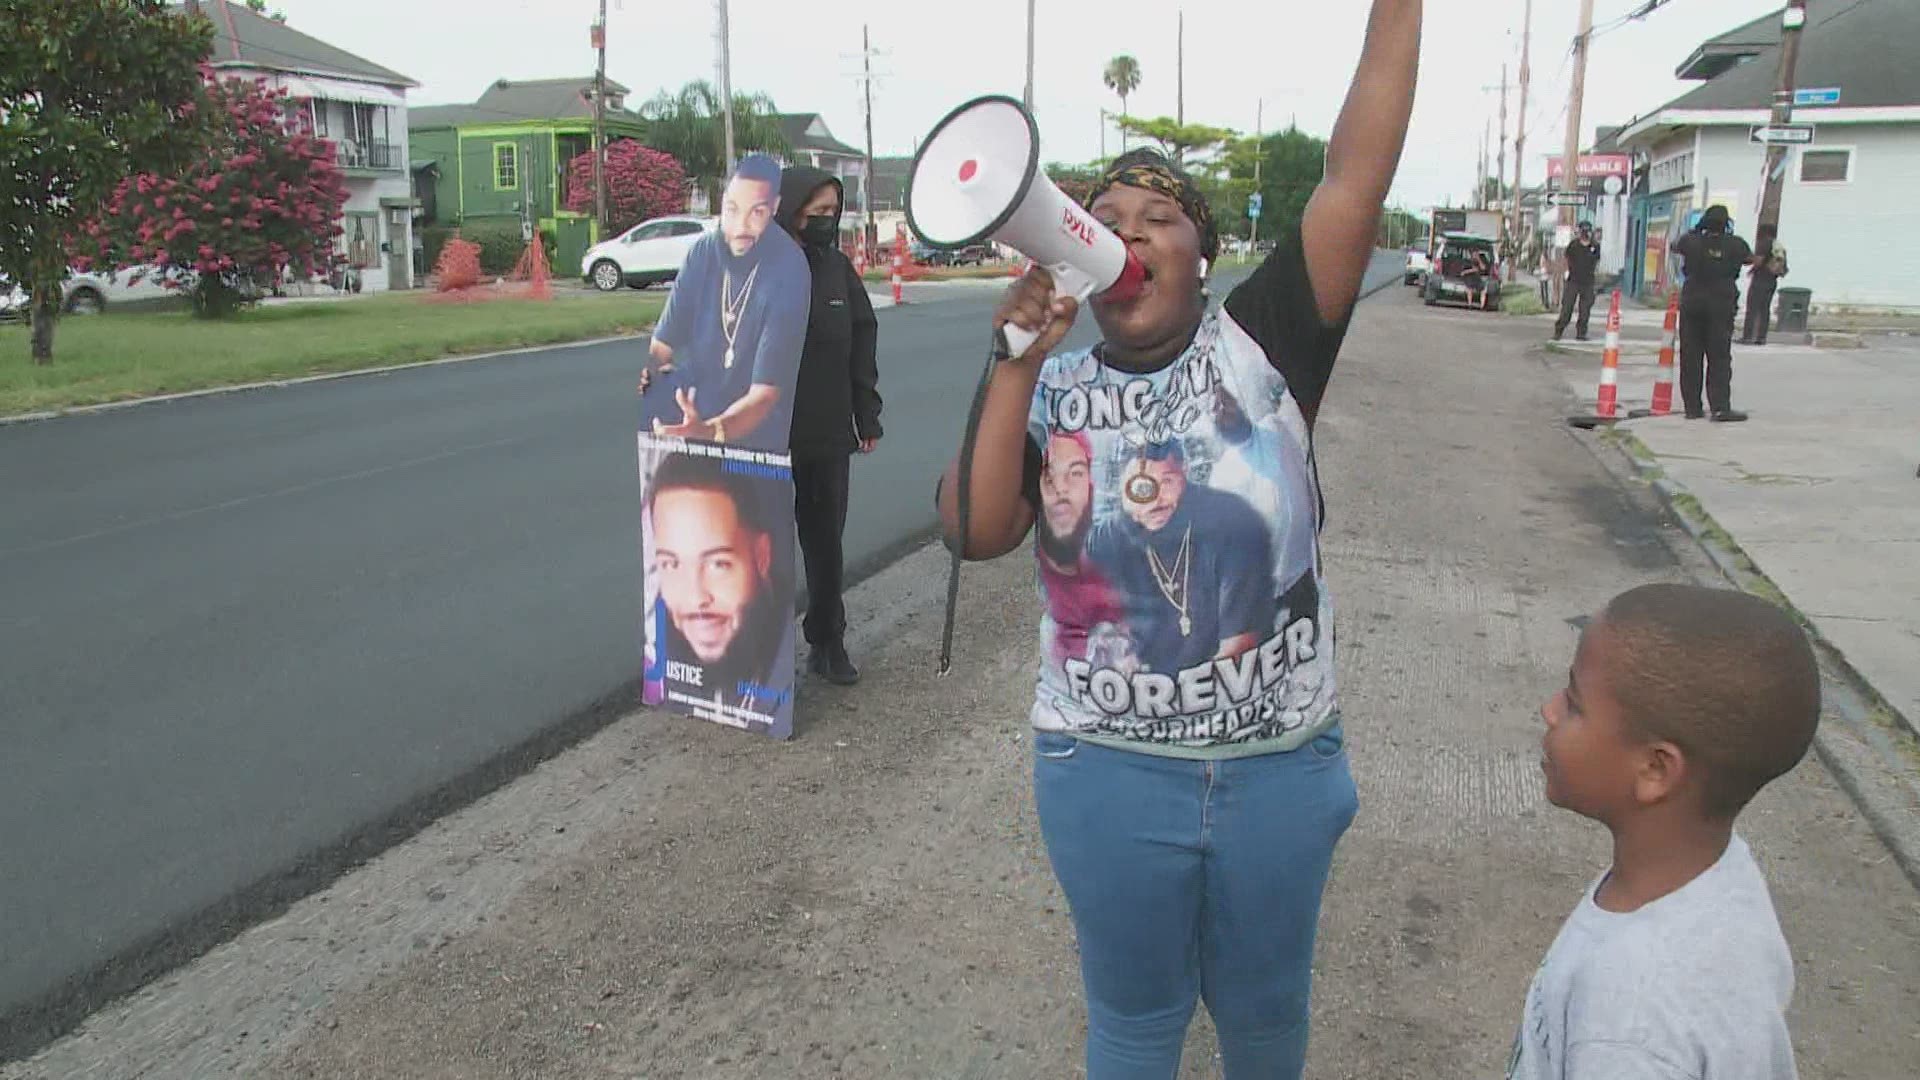 The family of a man killed last Fall outside of a New Orleans supermarket question what police say happened and why it was determined a justifiable homicide.